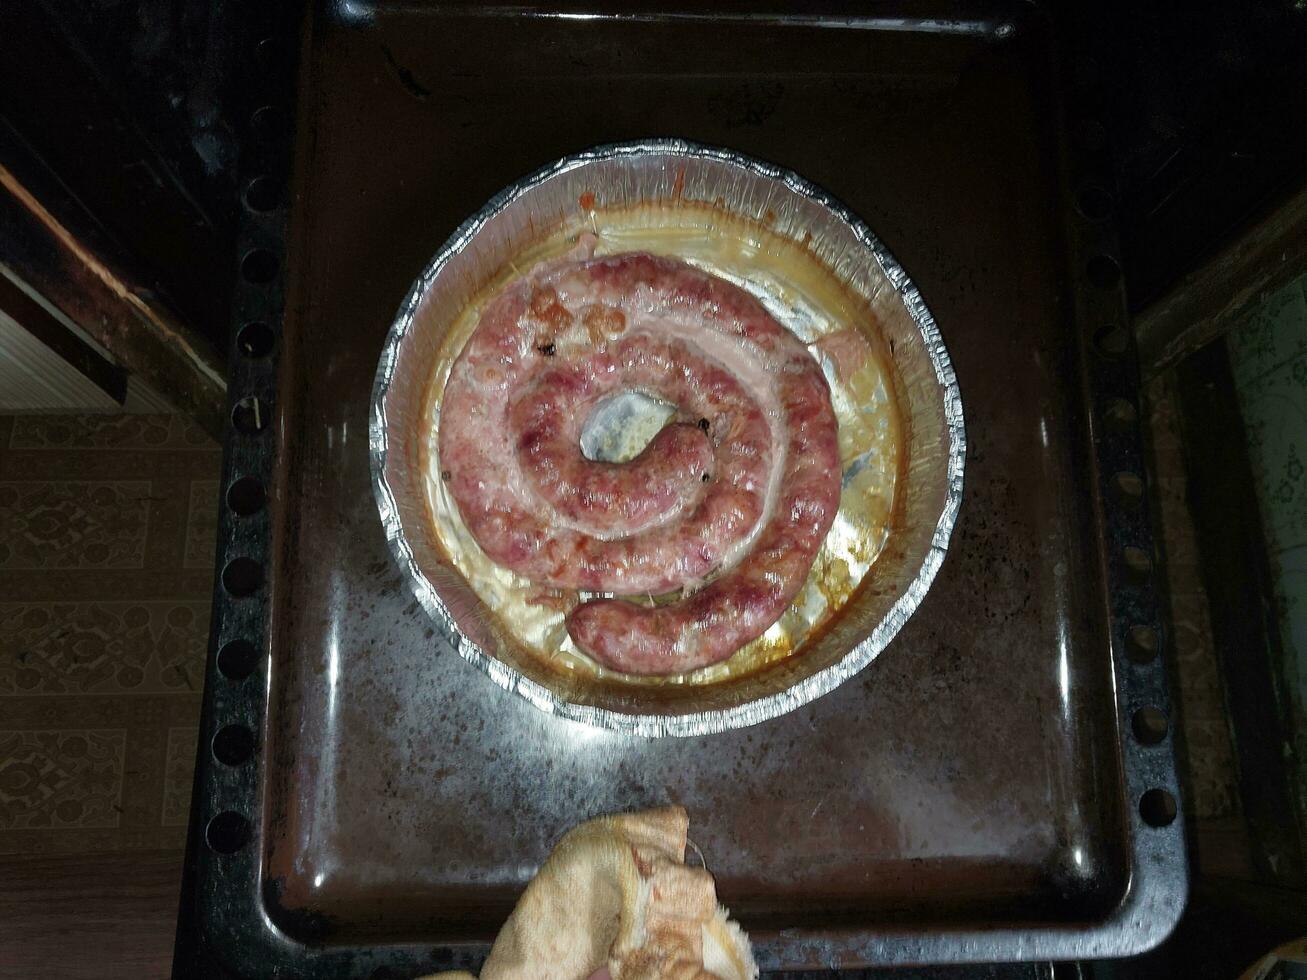 Sausage baked in the oven photo